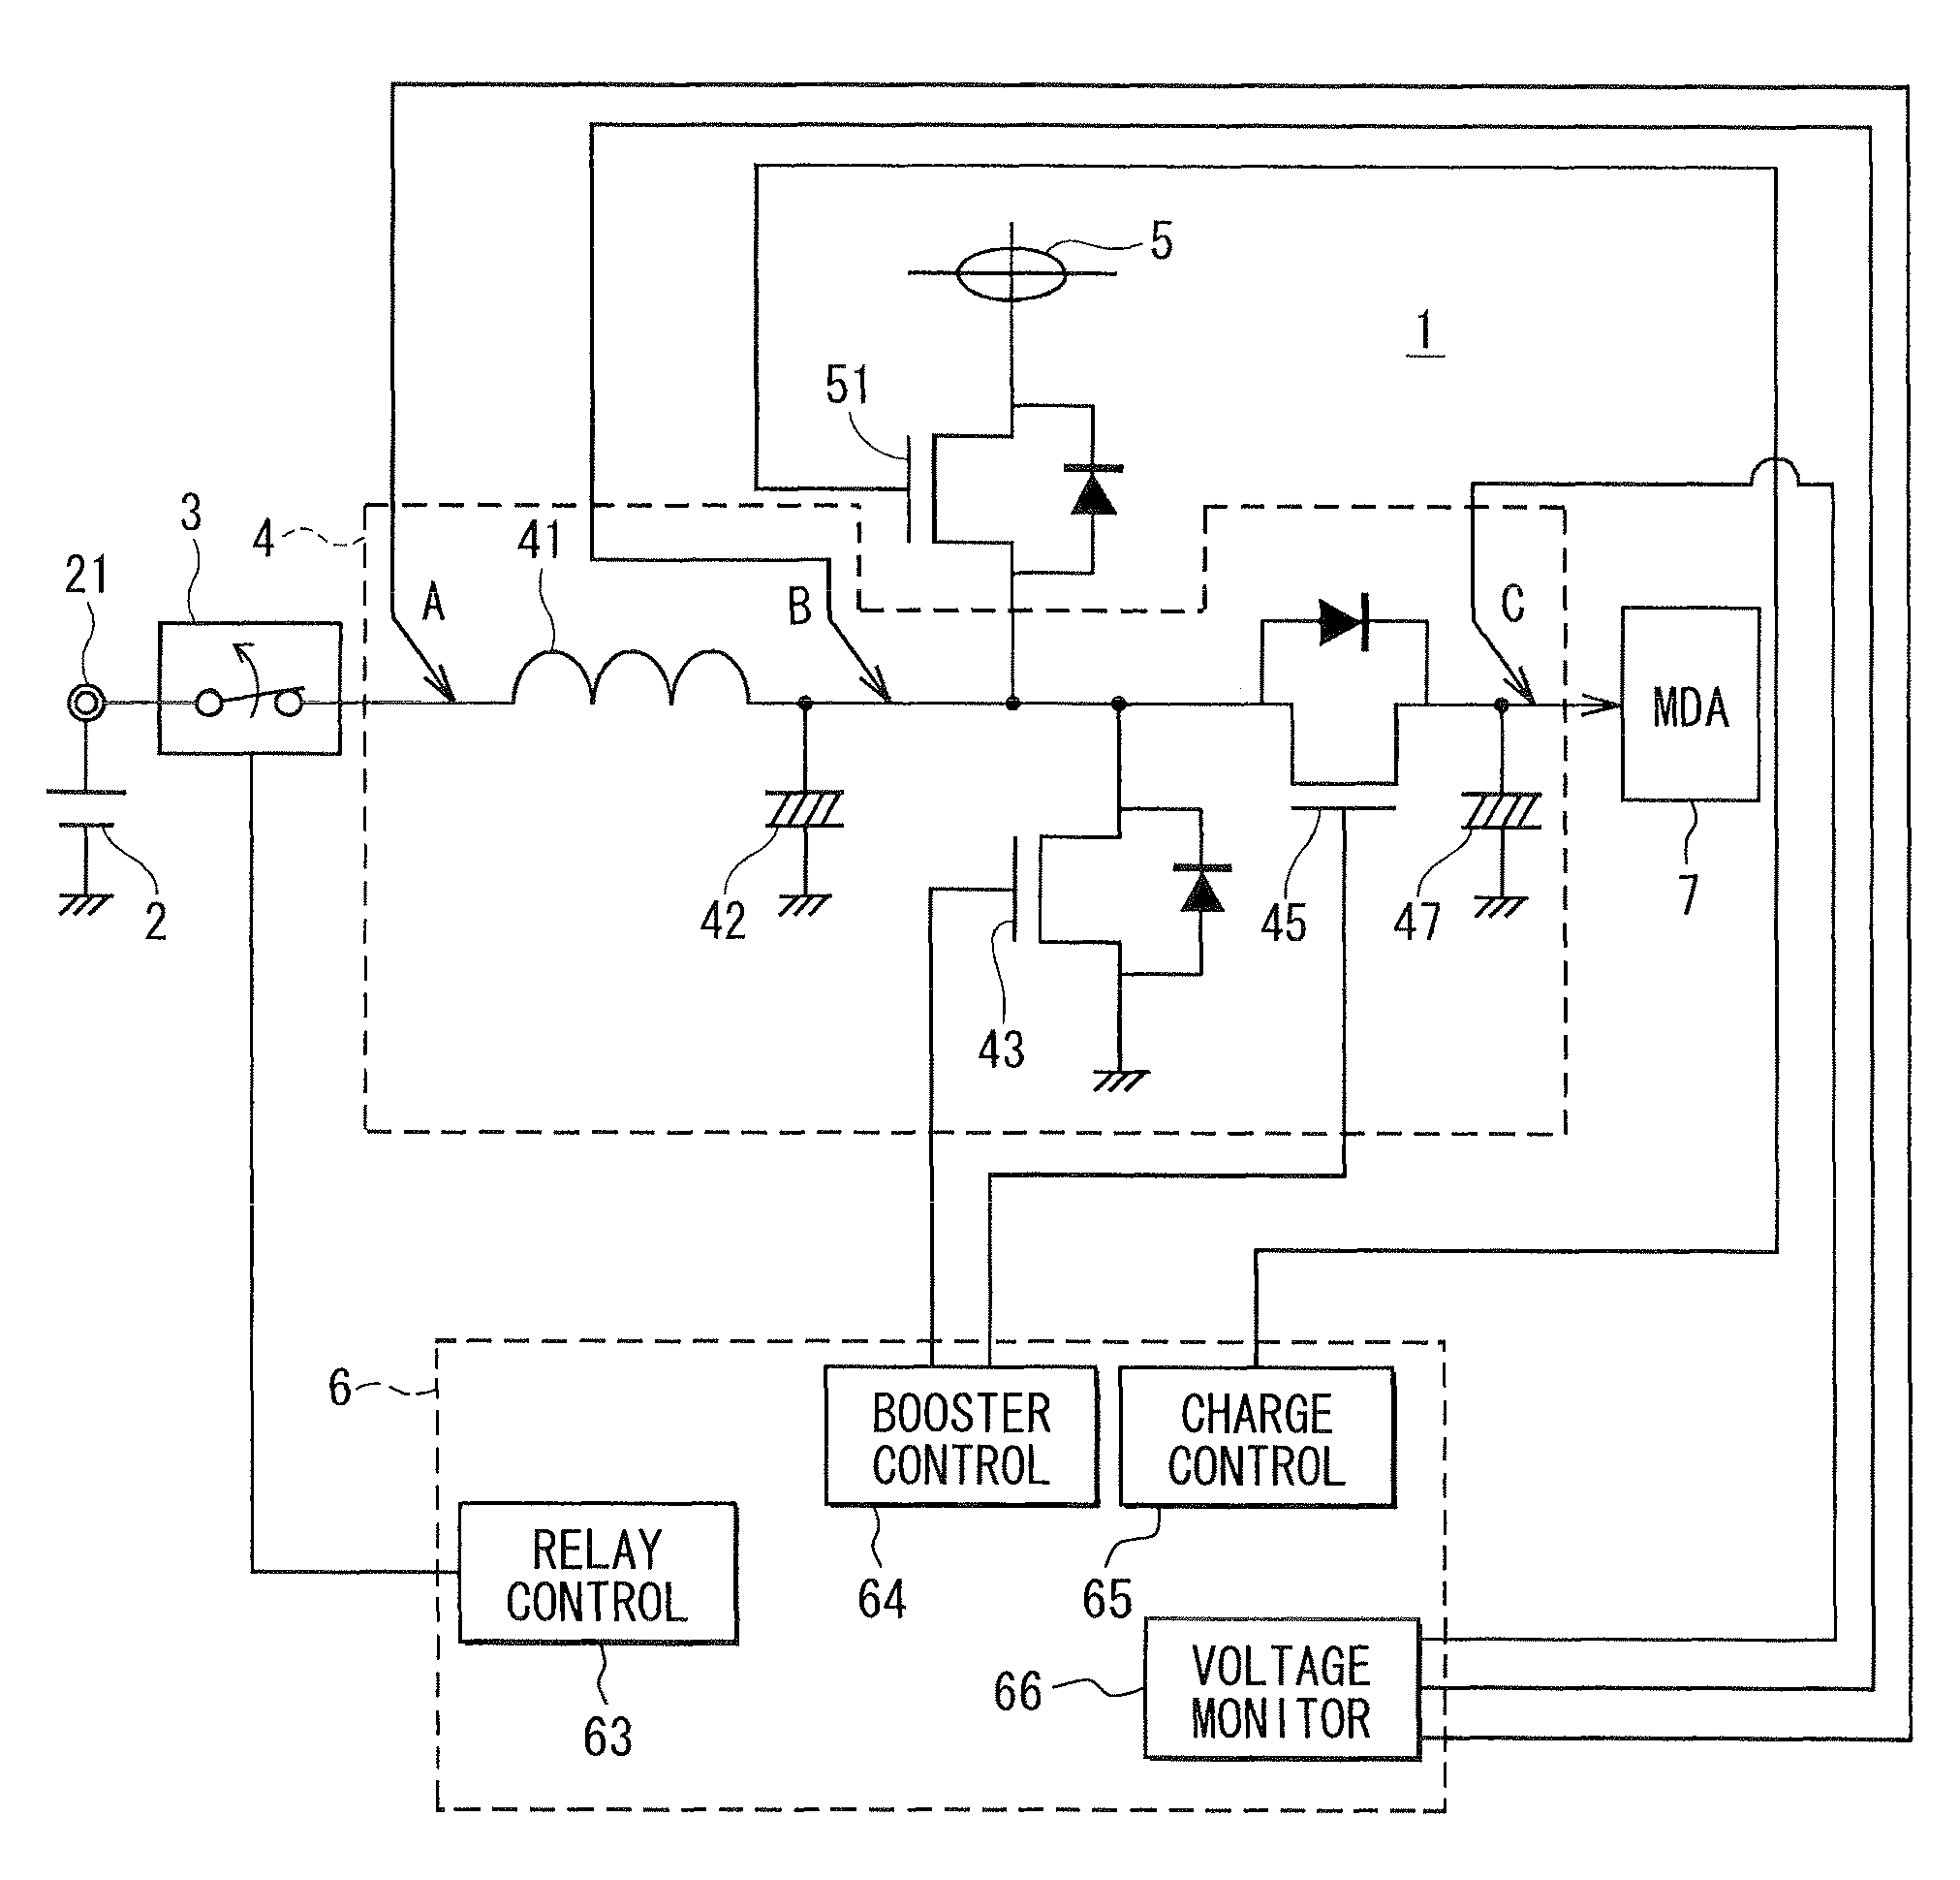 Voltage booster apparatus for power steering system